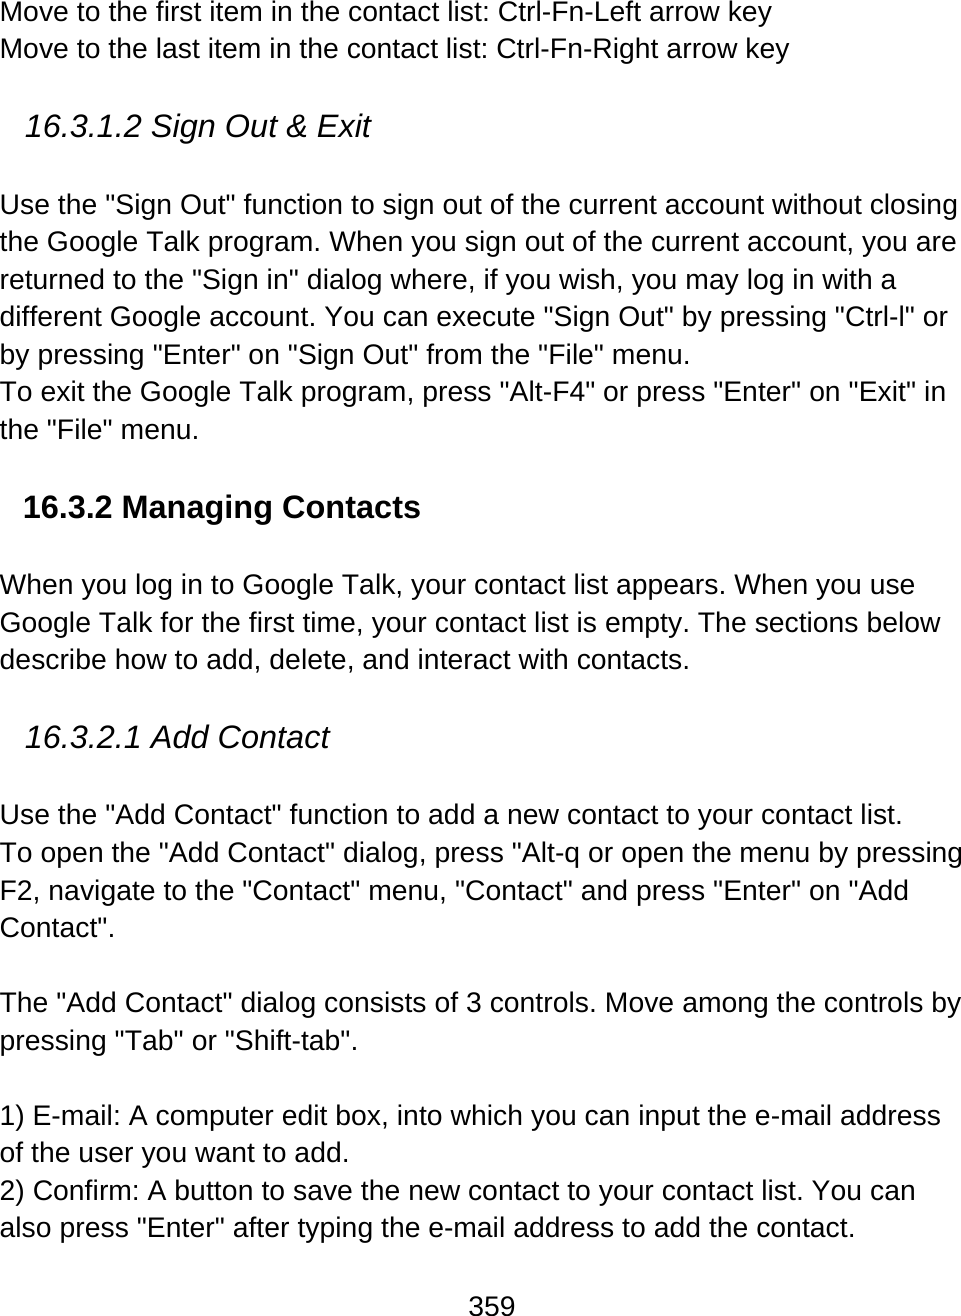 359  Move to the first item in the contact list: Ctrl-Fn-Left arrow key  Move to the last item in the contact list: Ctrl-Fn-Right arrow key   16.3.1.2 Sign Out &amp; Exit  Use the &quot;Sign Out&quot; function to sign out of the current account without closing the Google Talk program. When you sign out of the current account, you are returned to the &quot;Sign in&quot; dialog where, if you wish, you may log in with a different Google account. You can execute &quot;Sign Out&quot; by pressing &quot;Ctrl-l&quot; or by pressing &quot;Enter&quot; on &quot;Sign Out&quot; from the &quot;File&quot; menu.  To exit the Google Talk program, press &quot;Alt-F4&quot; or press &quot;Enter&quot; on &quot;Exit&quot; in the &quot;File&quot; menu.     16.3.2 Managing Contacts  When you log in to Google Talk, your contact list appears. When you use Google Talk for the first time, your contact list is empty. The sections below describe how to add, delete, and interact with contacts.    16.3.2.1 Add Contact  Use the &quot;Add Contact&quot; function to add a new contact to your contact list.  To open the &quot;Add Contact&quot; dialog, press &quot;Alt-q or open the menu by pressing F2, navigate to the &quot;Contact&quot; menu, &quot;Contact&quot; and press &quot;Enter&quot; on &quot;Add Contact&quot;.    The &quot;Add Contact&quot; dialog consists of 3 controls. Move among the controls by pressing &quot;Tab&quot; or &quot;Shift-tab&quot;.  1) E-mail: A computer edit box, into which you can input the e-mail address of the user you want to add.  2) Confirm: A button to save the new contact to your contact list. You can also press &quot;Enter&quot; after typing the e-mail address to add the contact.  